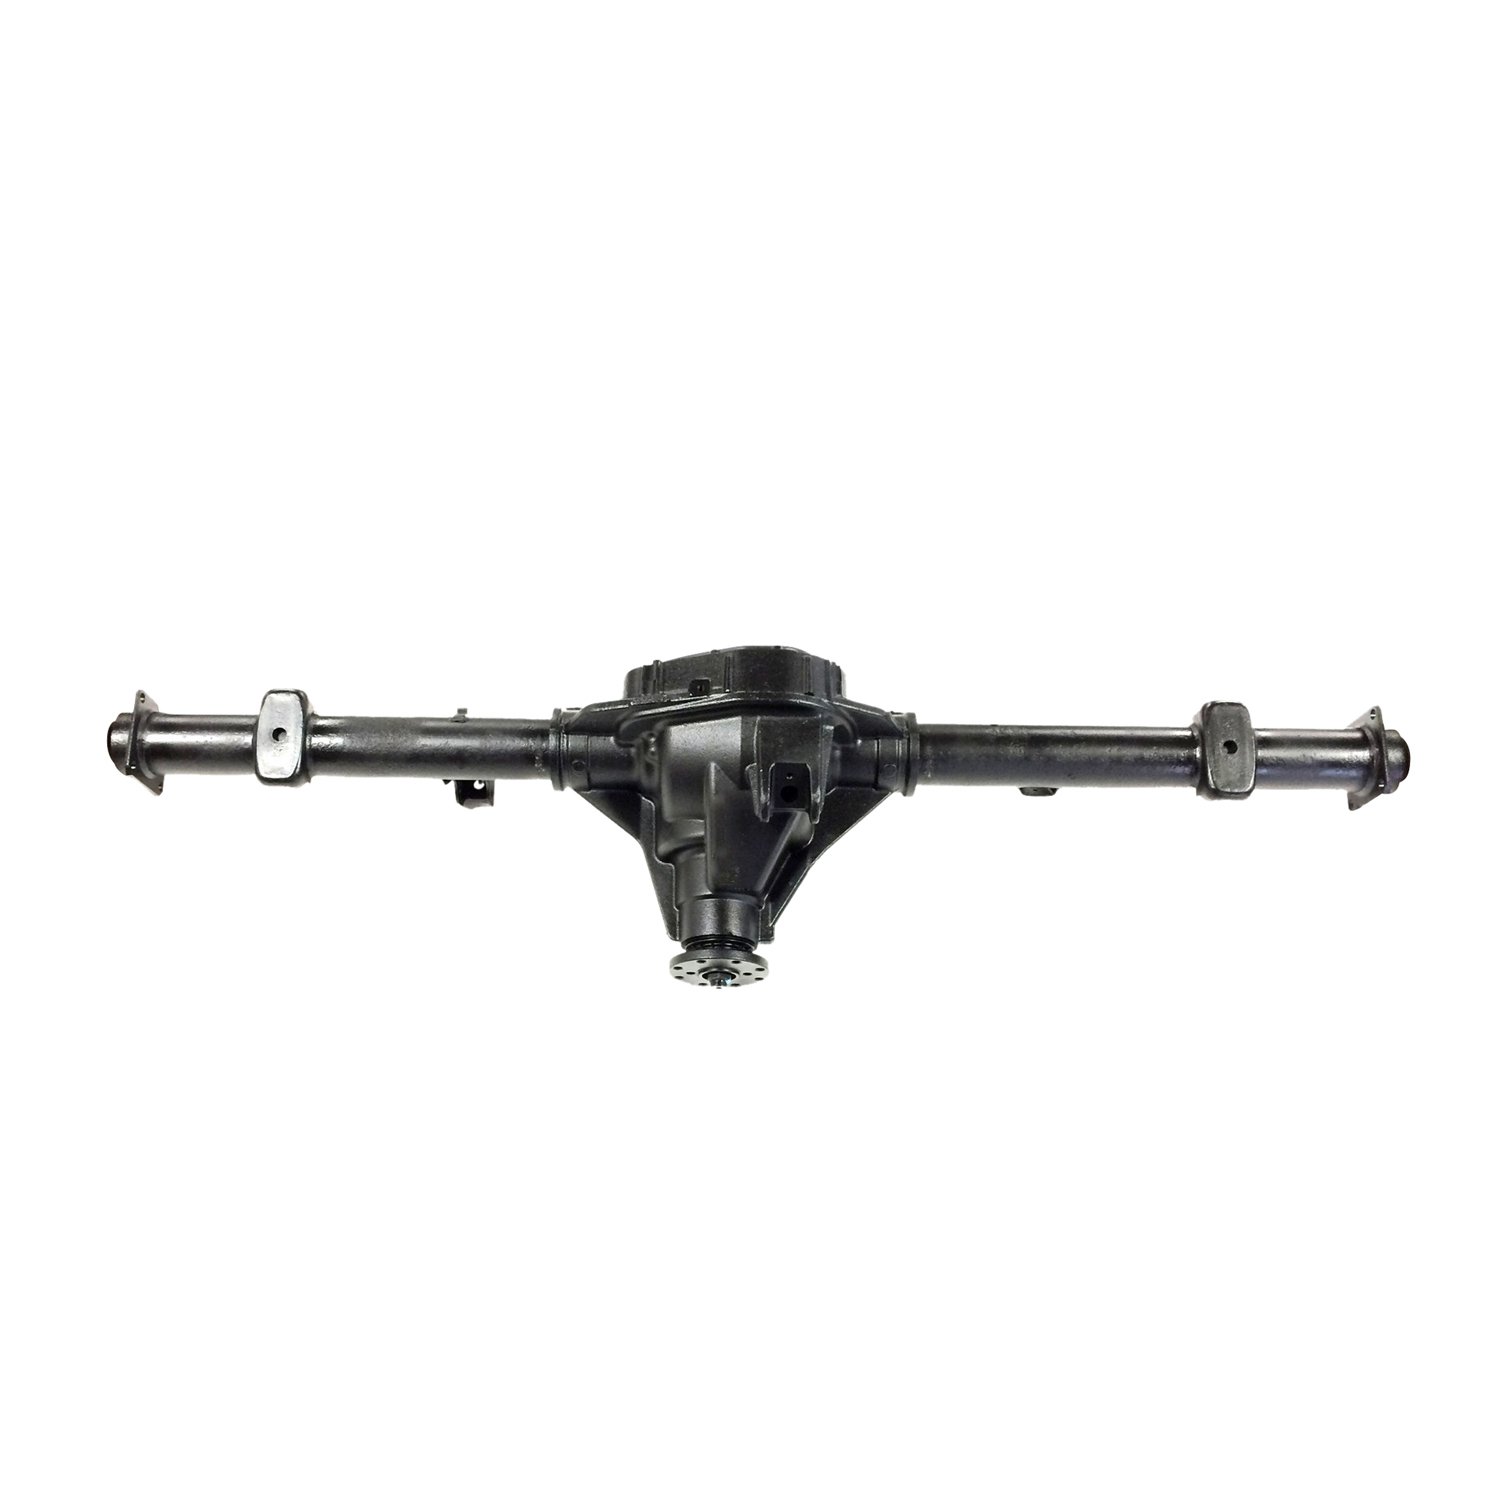 Remanufactured Axle Assy for 9.75" 99-00 F150 3.55 , Rear Drum, Posi LSD *Check Tag*